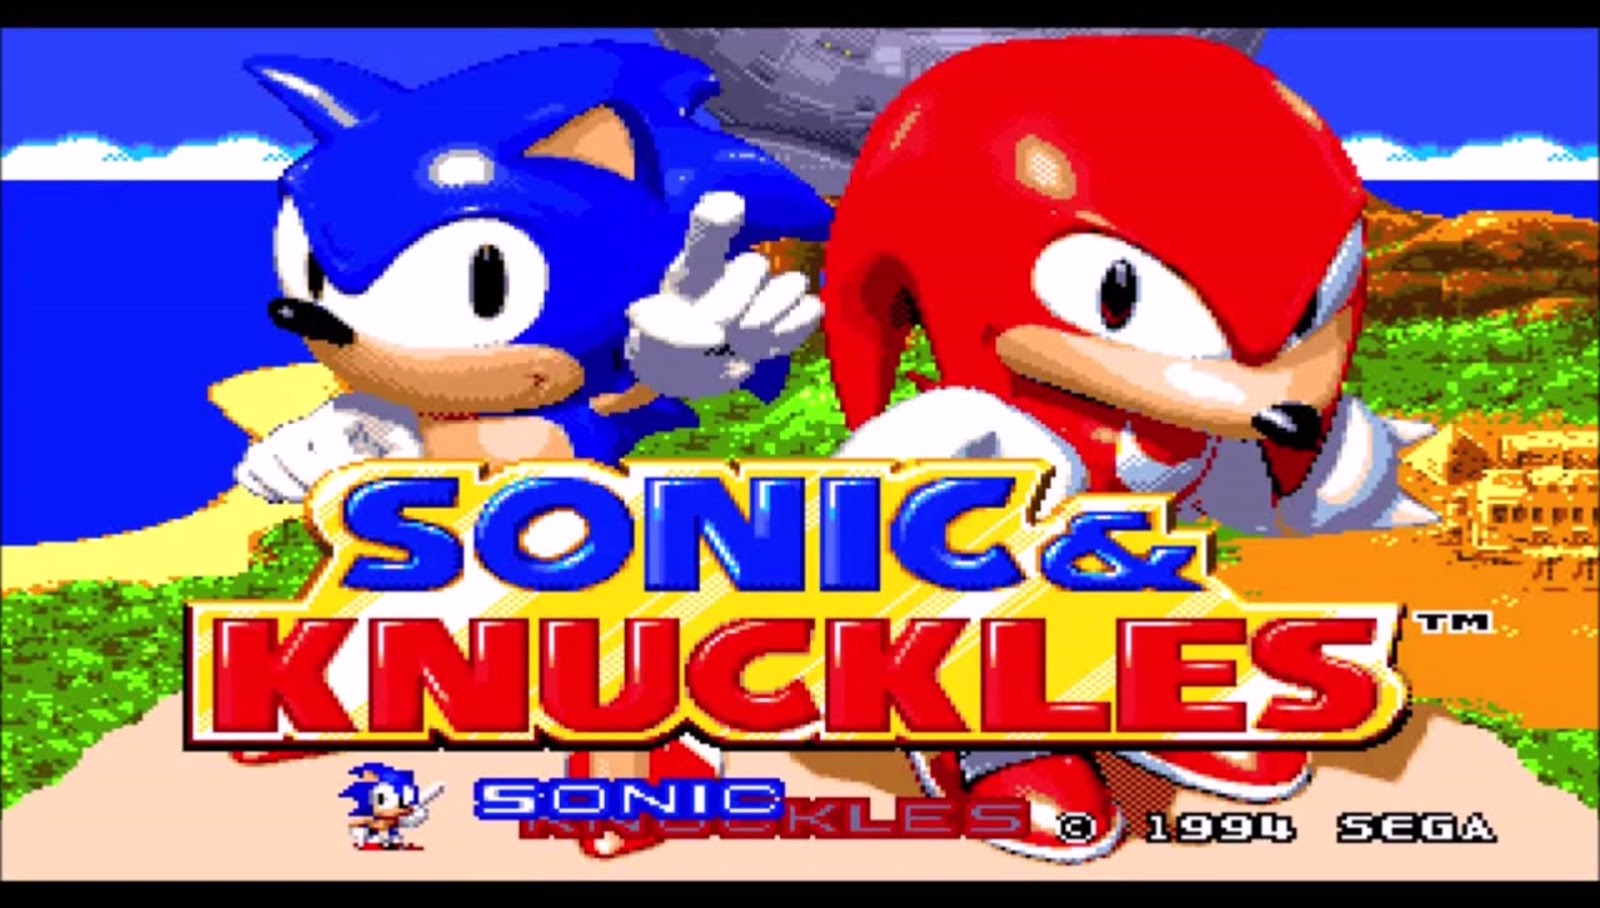 Sonic knuckles air. Sonic Knuckles игра. Sonic 3 & Knuckles игра. Sonic 3 & Knuckles Sega. Sega Sonic и НАКЛЗ.